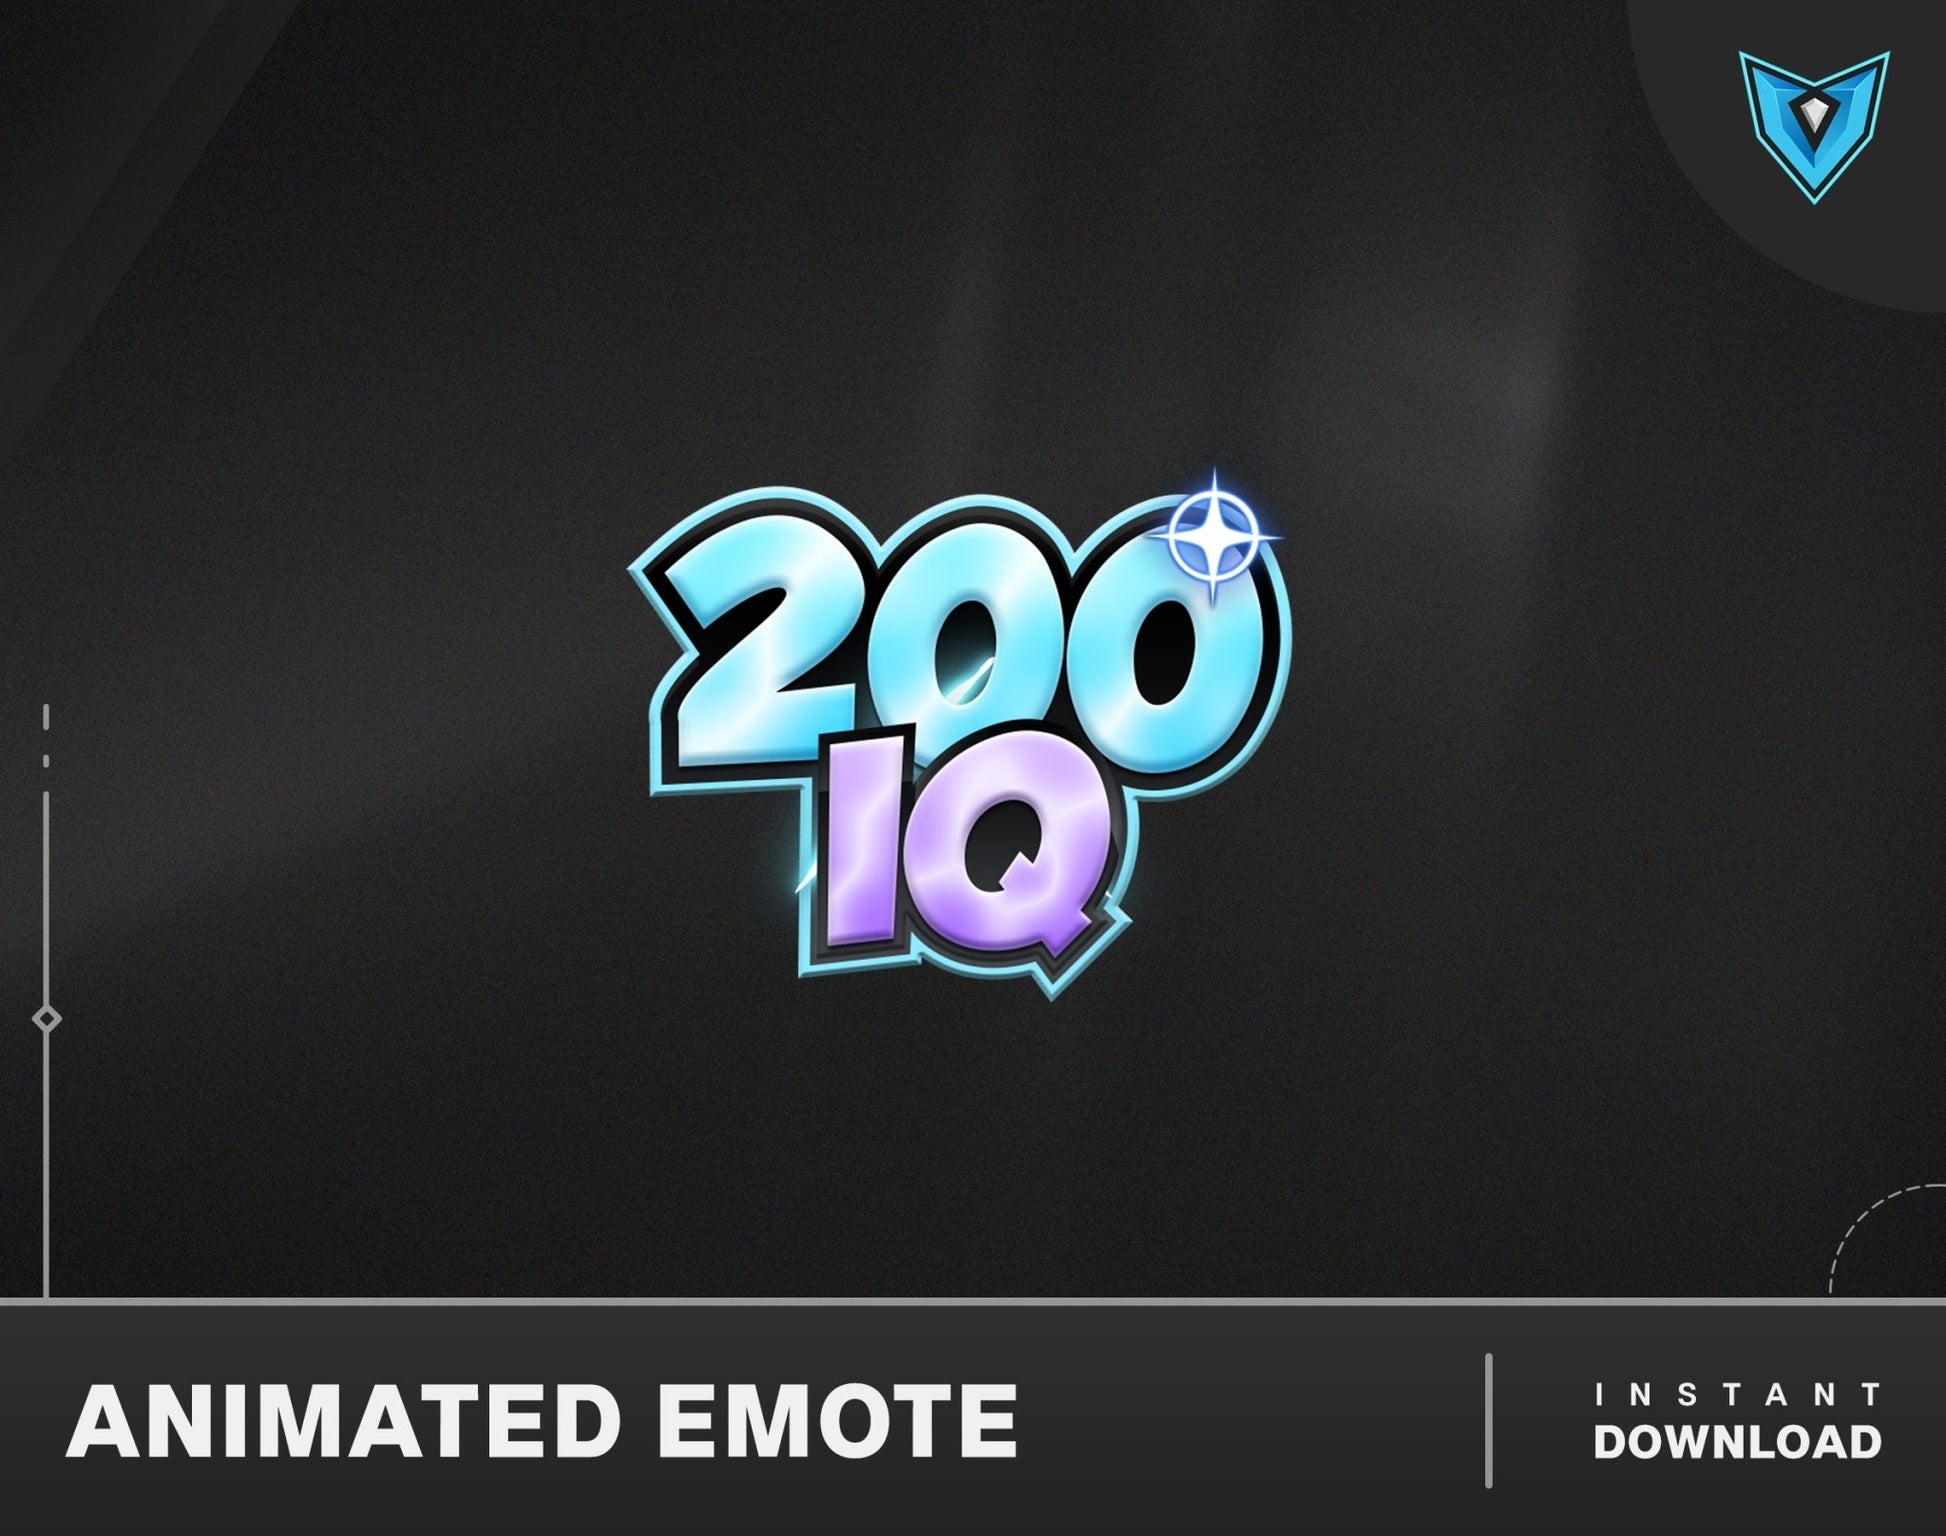 ALL UPDATED EMOTES AND ANIMATIONS